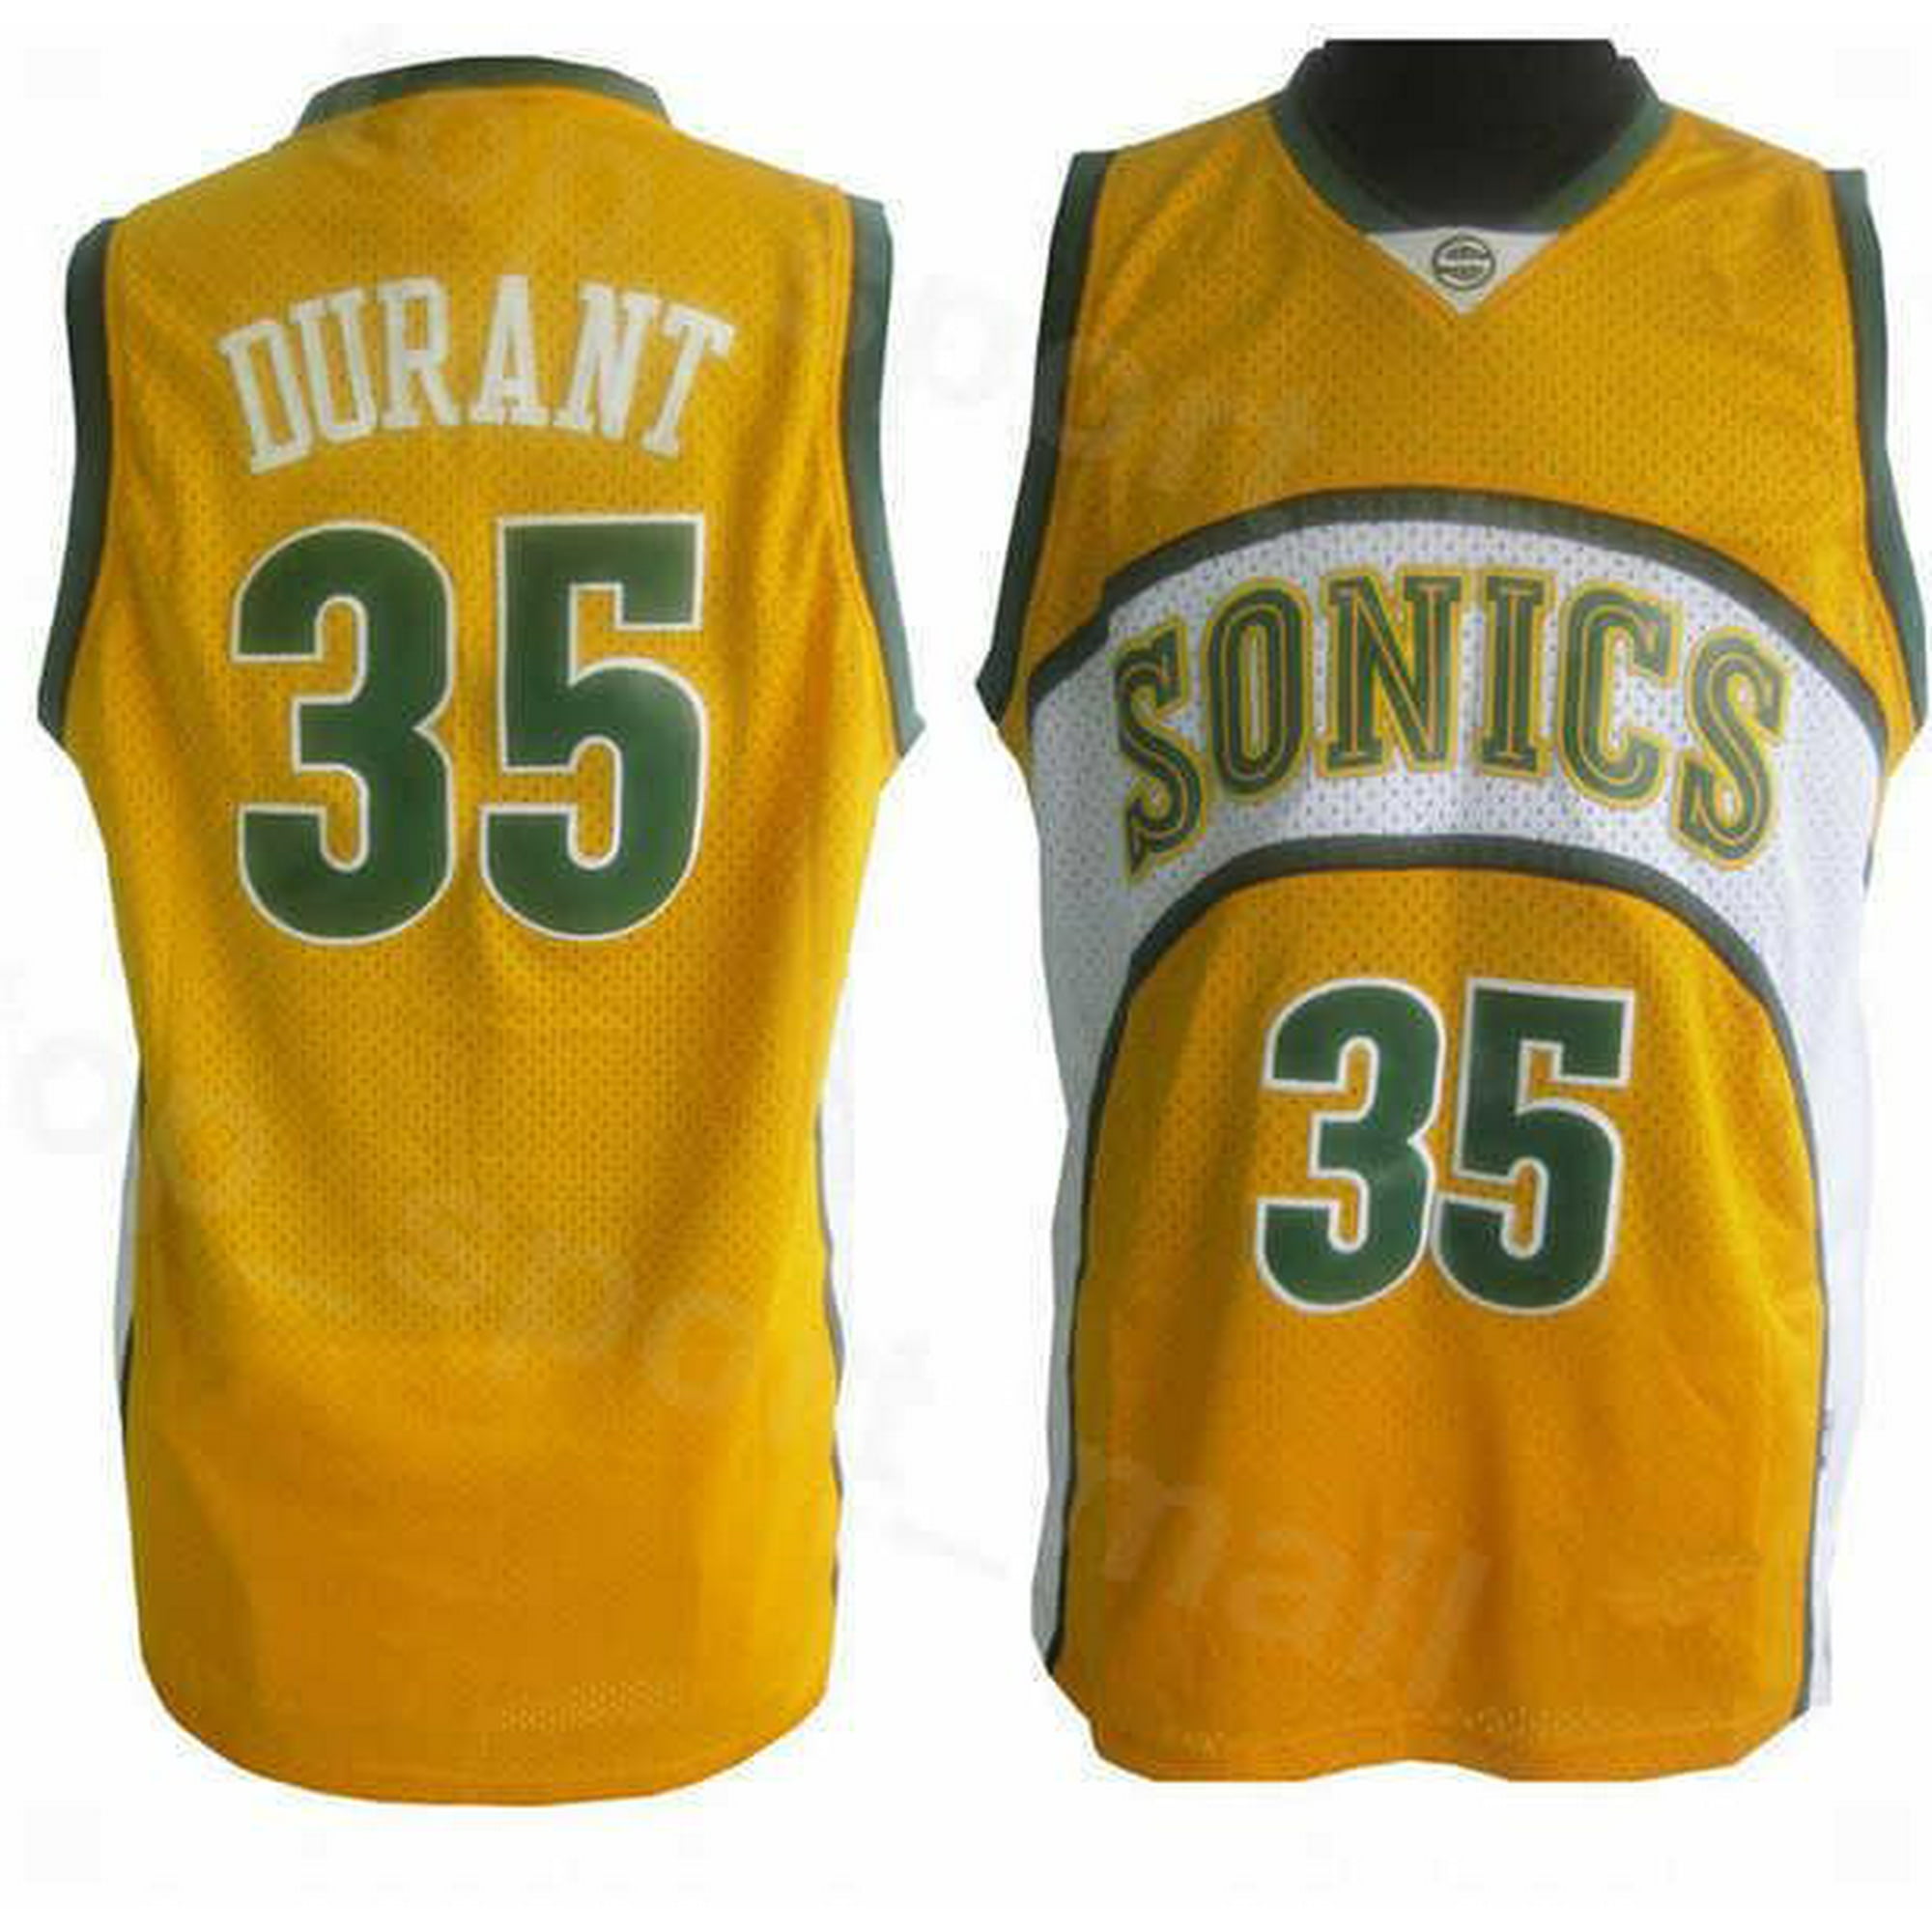 NBA_ jersey Men Basketball Shawn Kemp Jersey Gary Payton Kevin Durant Ray  Allen Stitched Green Yellow White Red Home Away Breath''nba''jerseys 